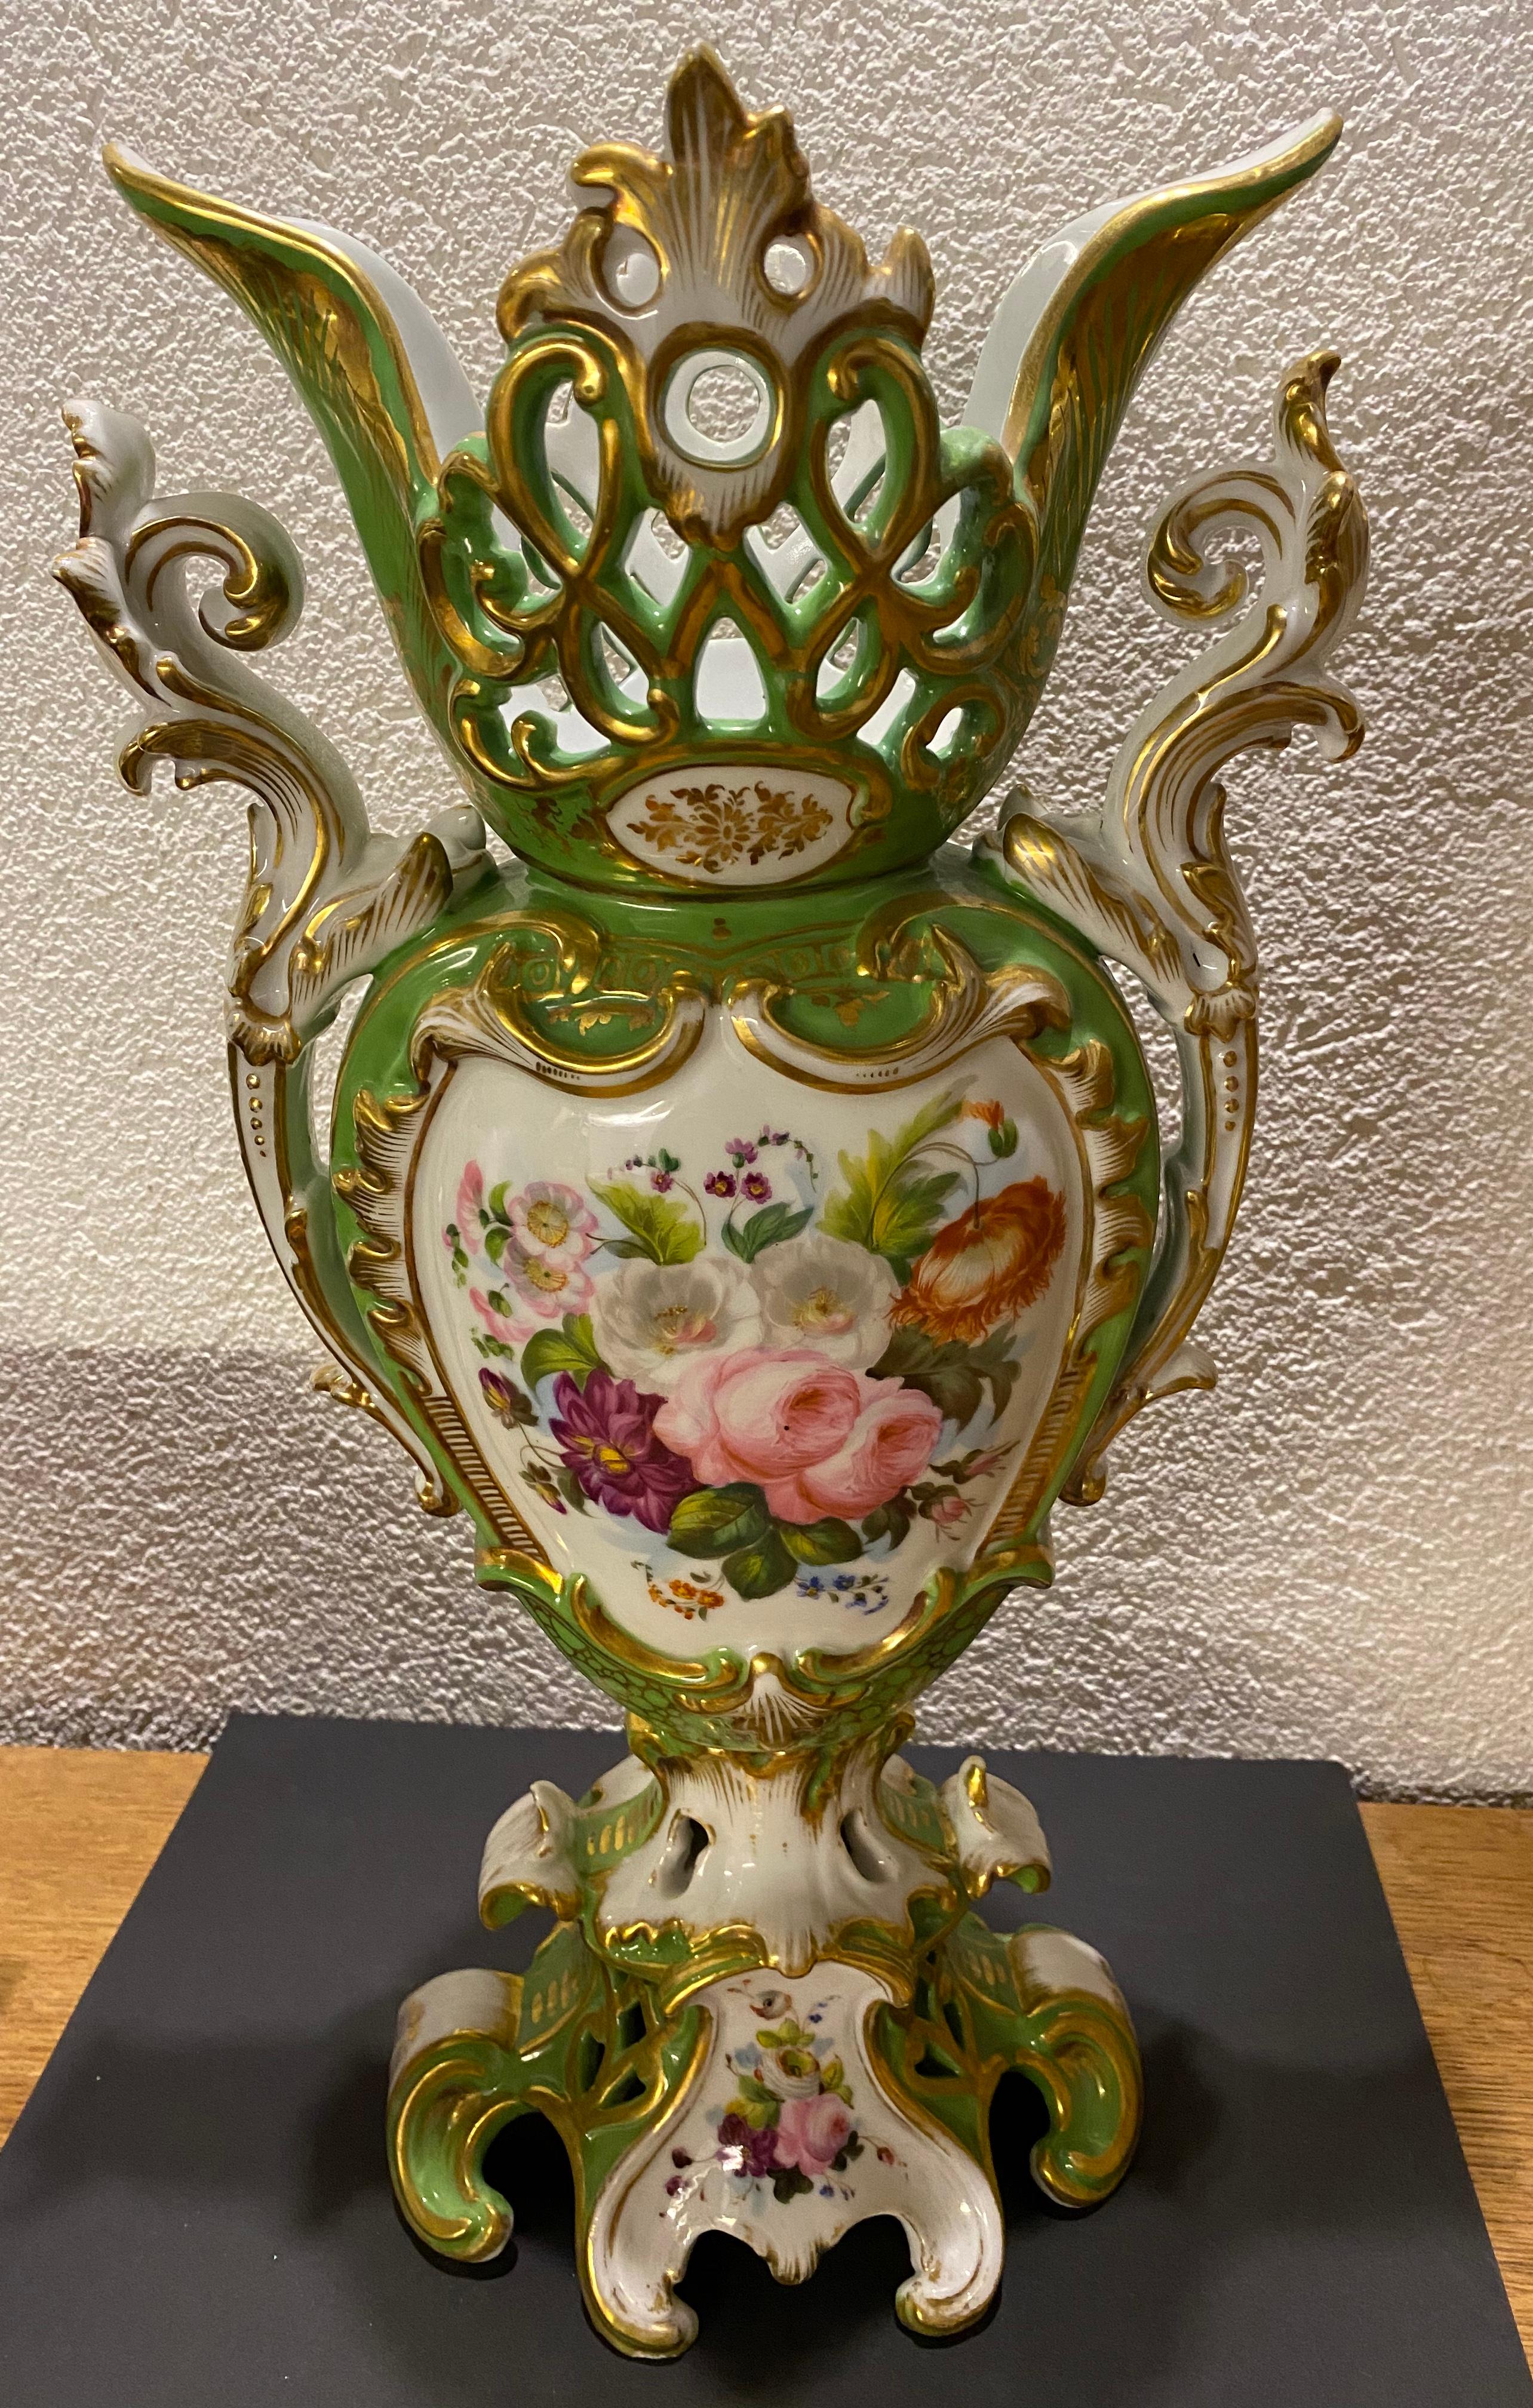 Pair of painted French porcelain vases hand painted front and back with flowers and gallant scene Luigi Filippo period, circa 1860. Measures: cm 40 H, 20 x 13cm.